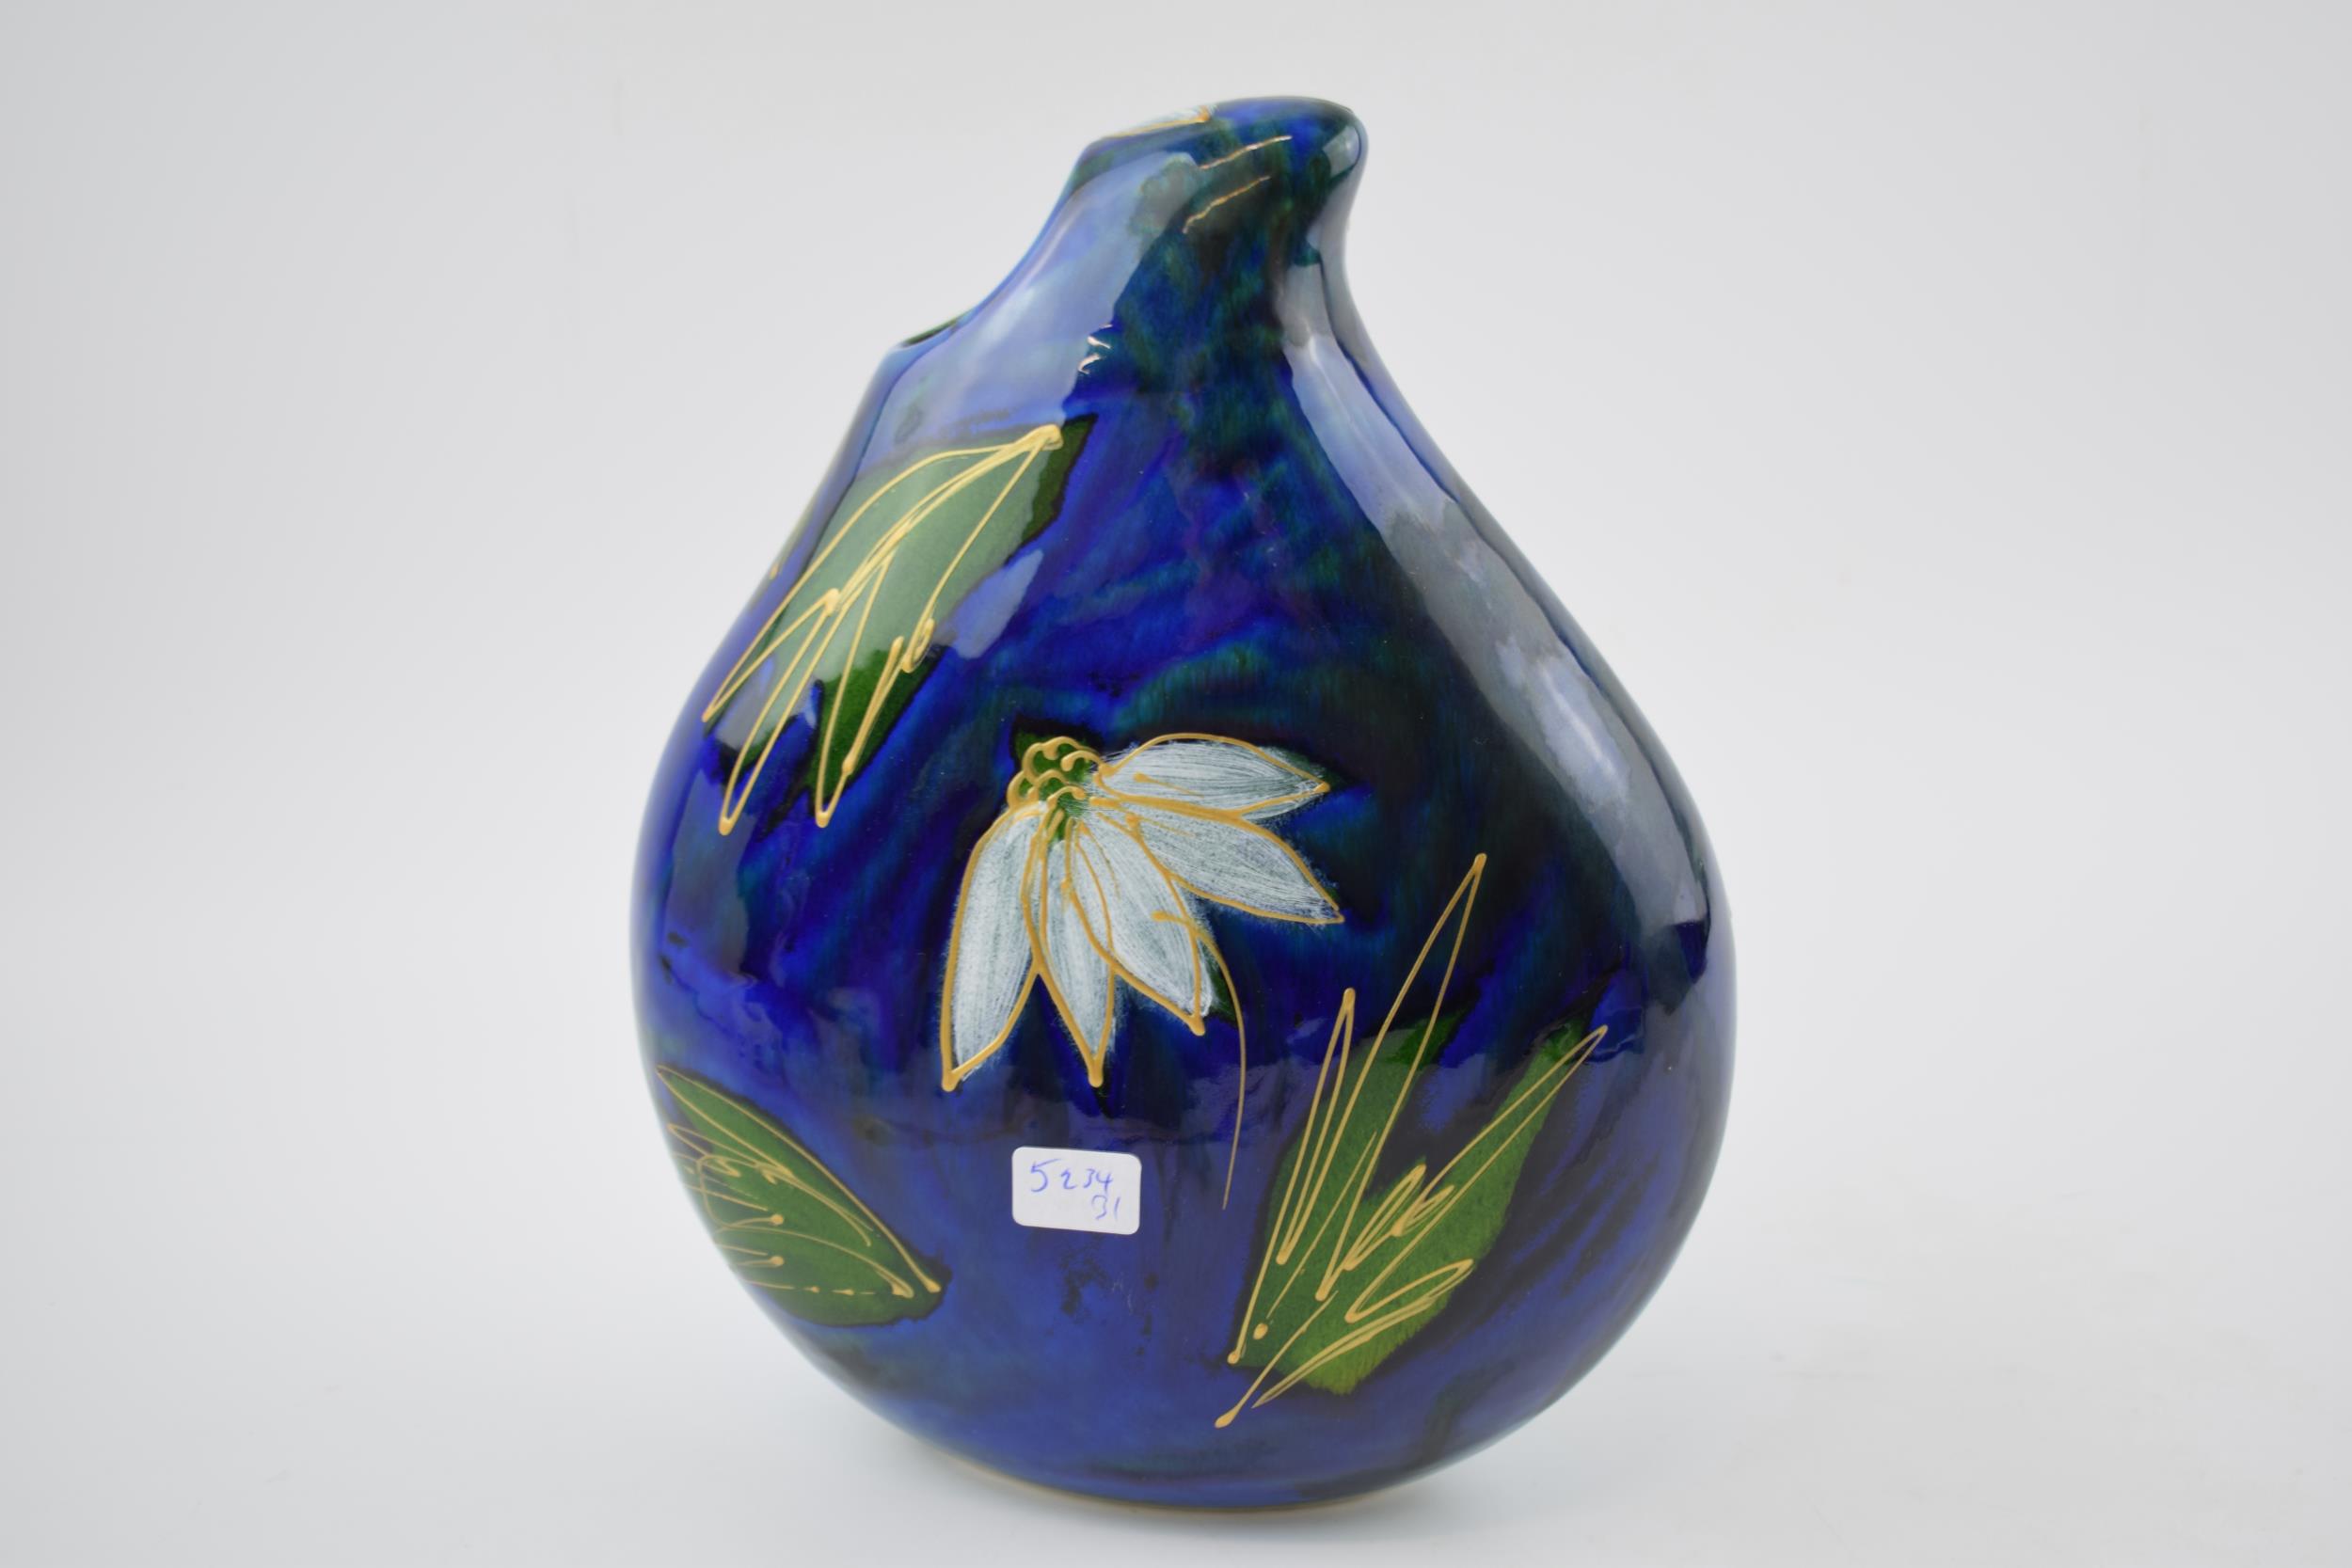 Early Anita Harris Art Pottery teardrop vase, decorated with a blue and green floral scene, 22cm - Image 2 of 3